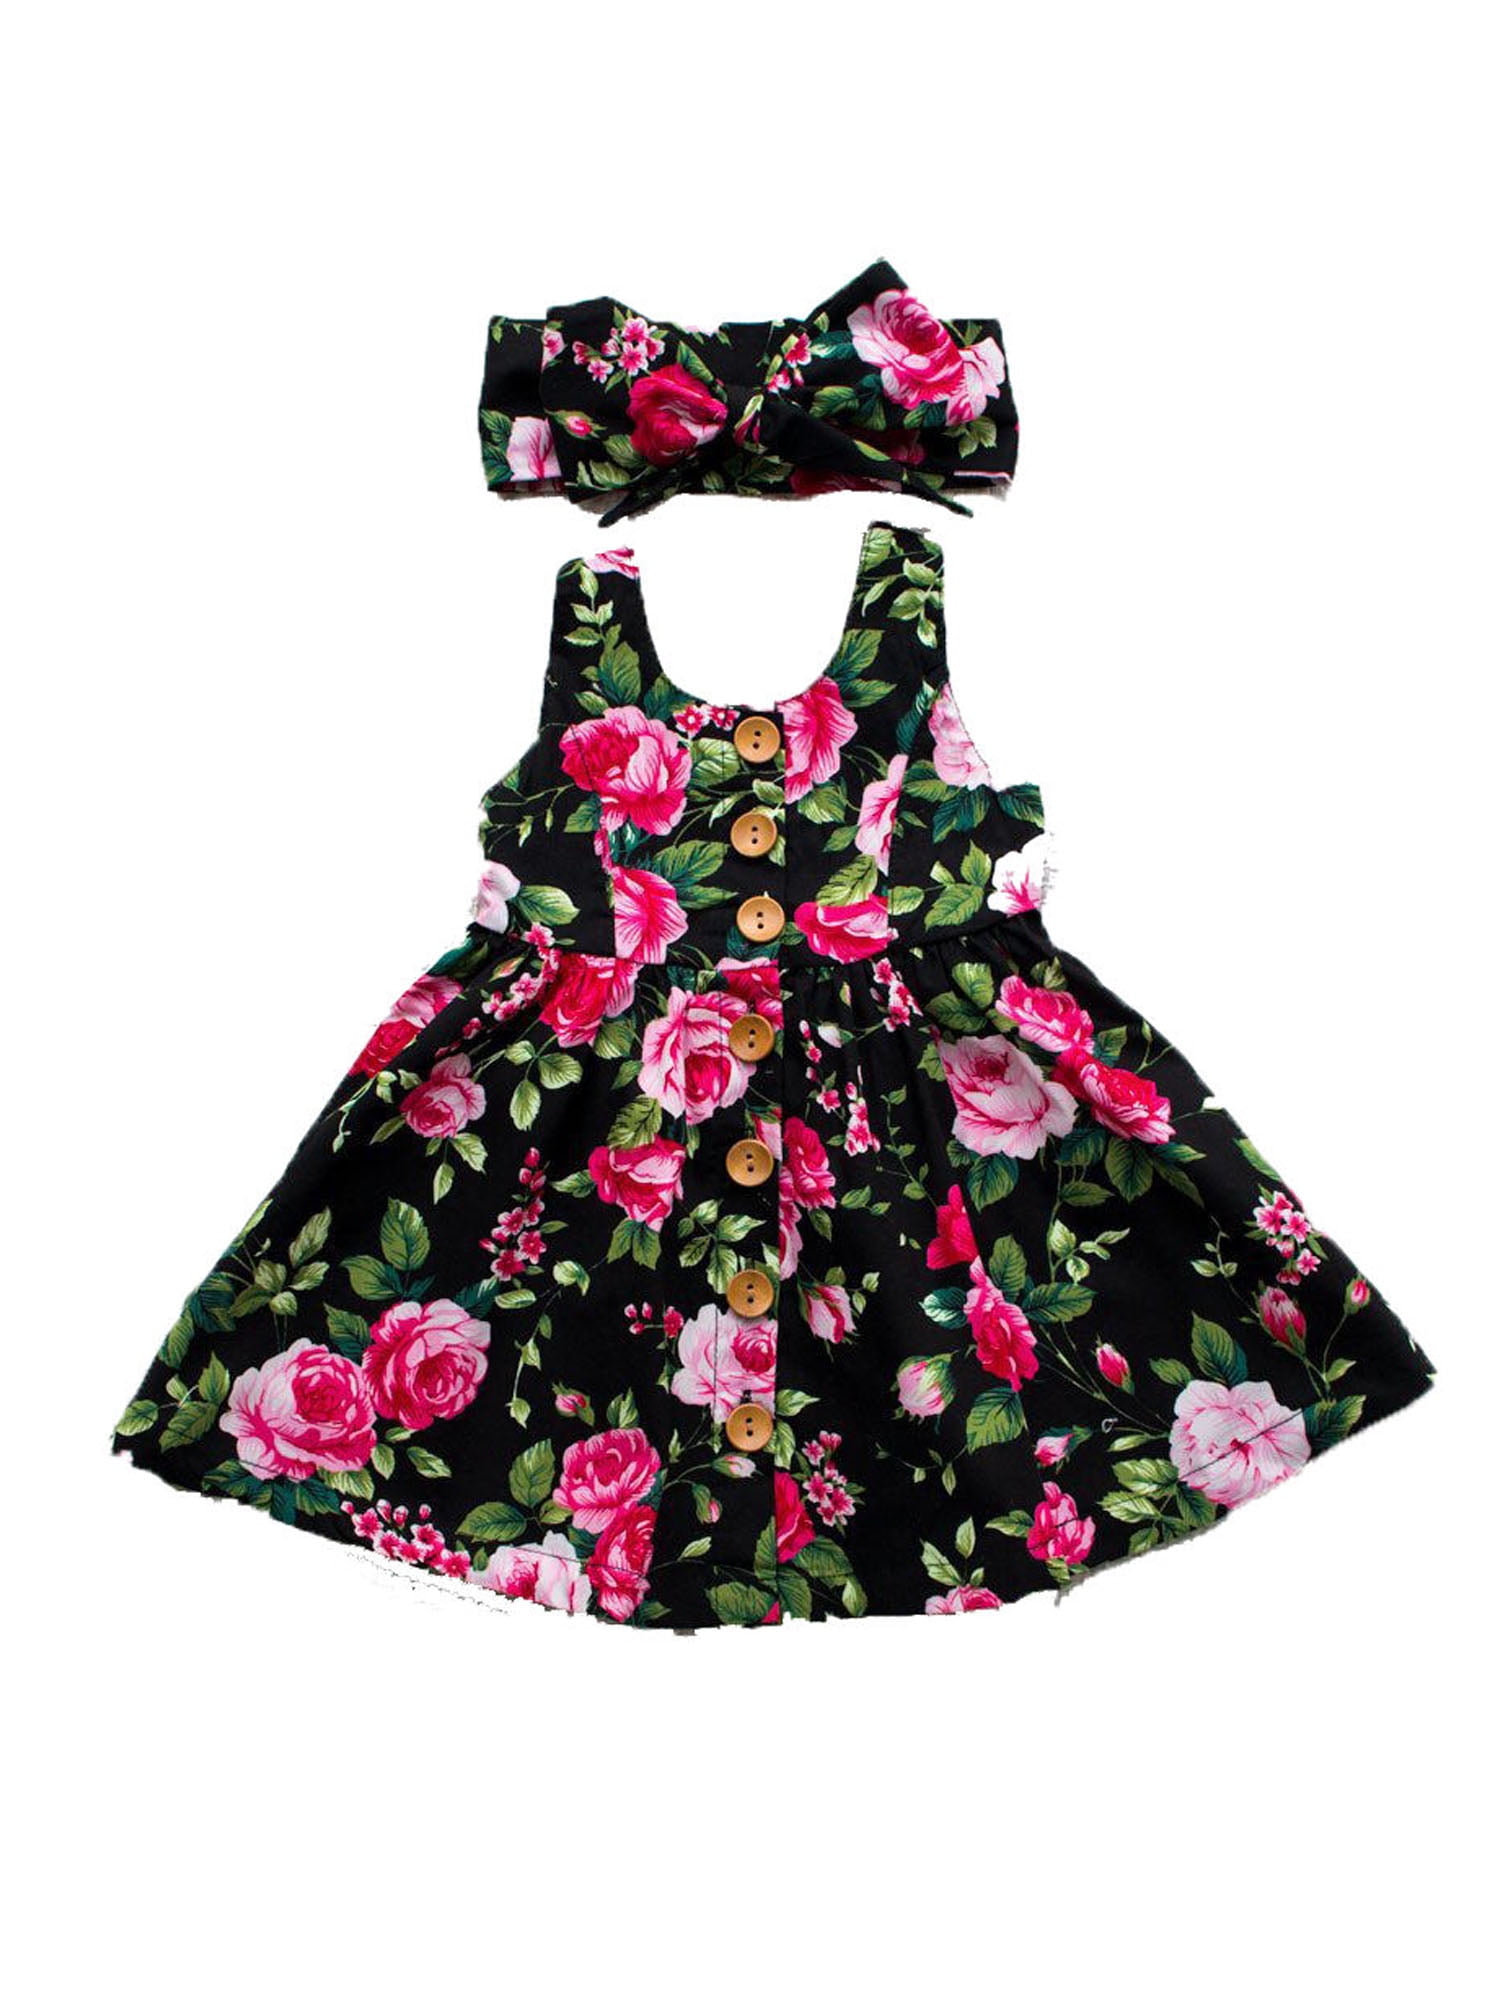 Spring Princess Girls Dress Baby Kids Little Girls Long Sleeve Solid Color Ruched Floral Party Casual Dress TM Jchen